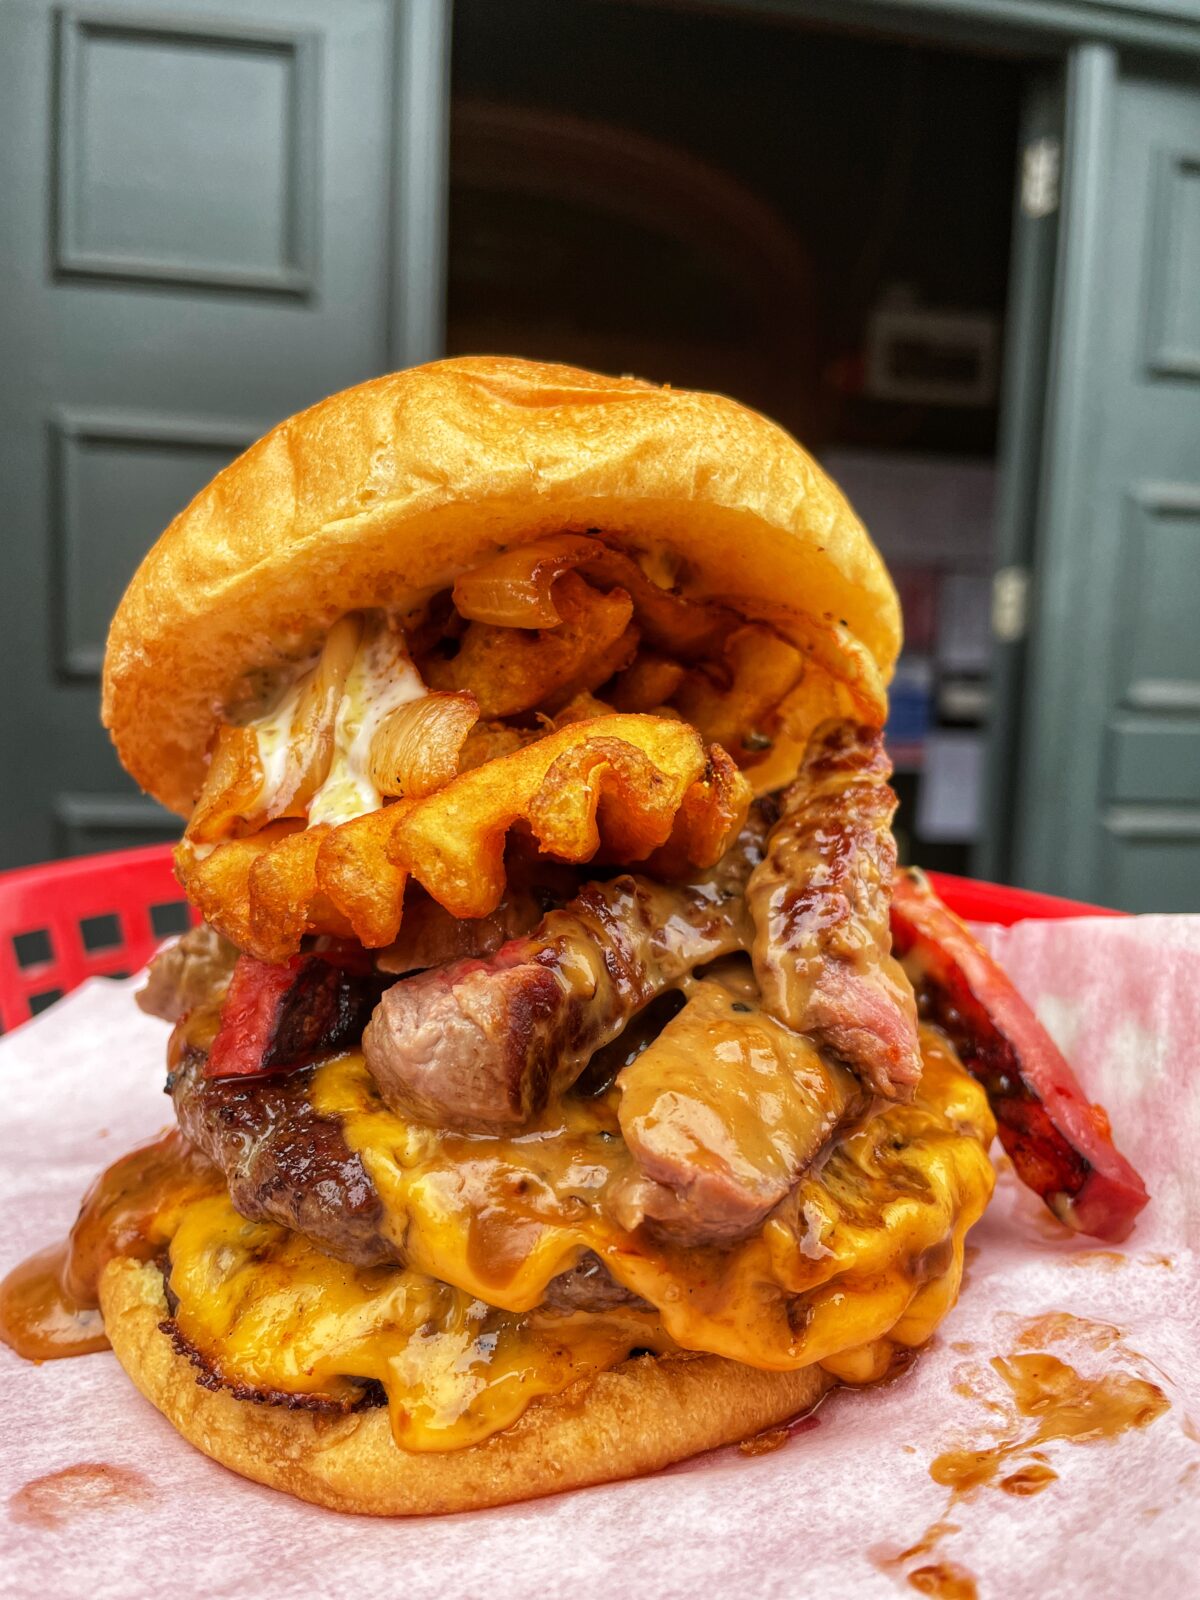 A burger from Almost Famous. 